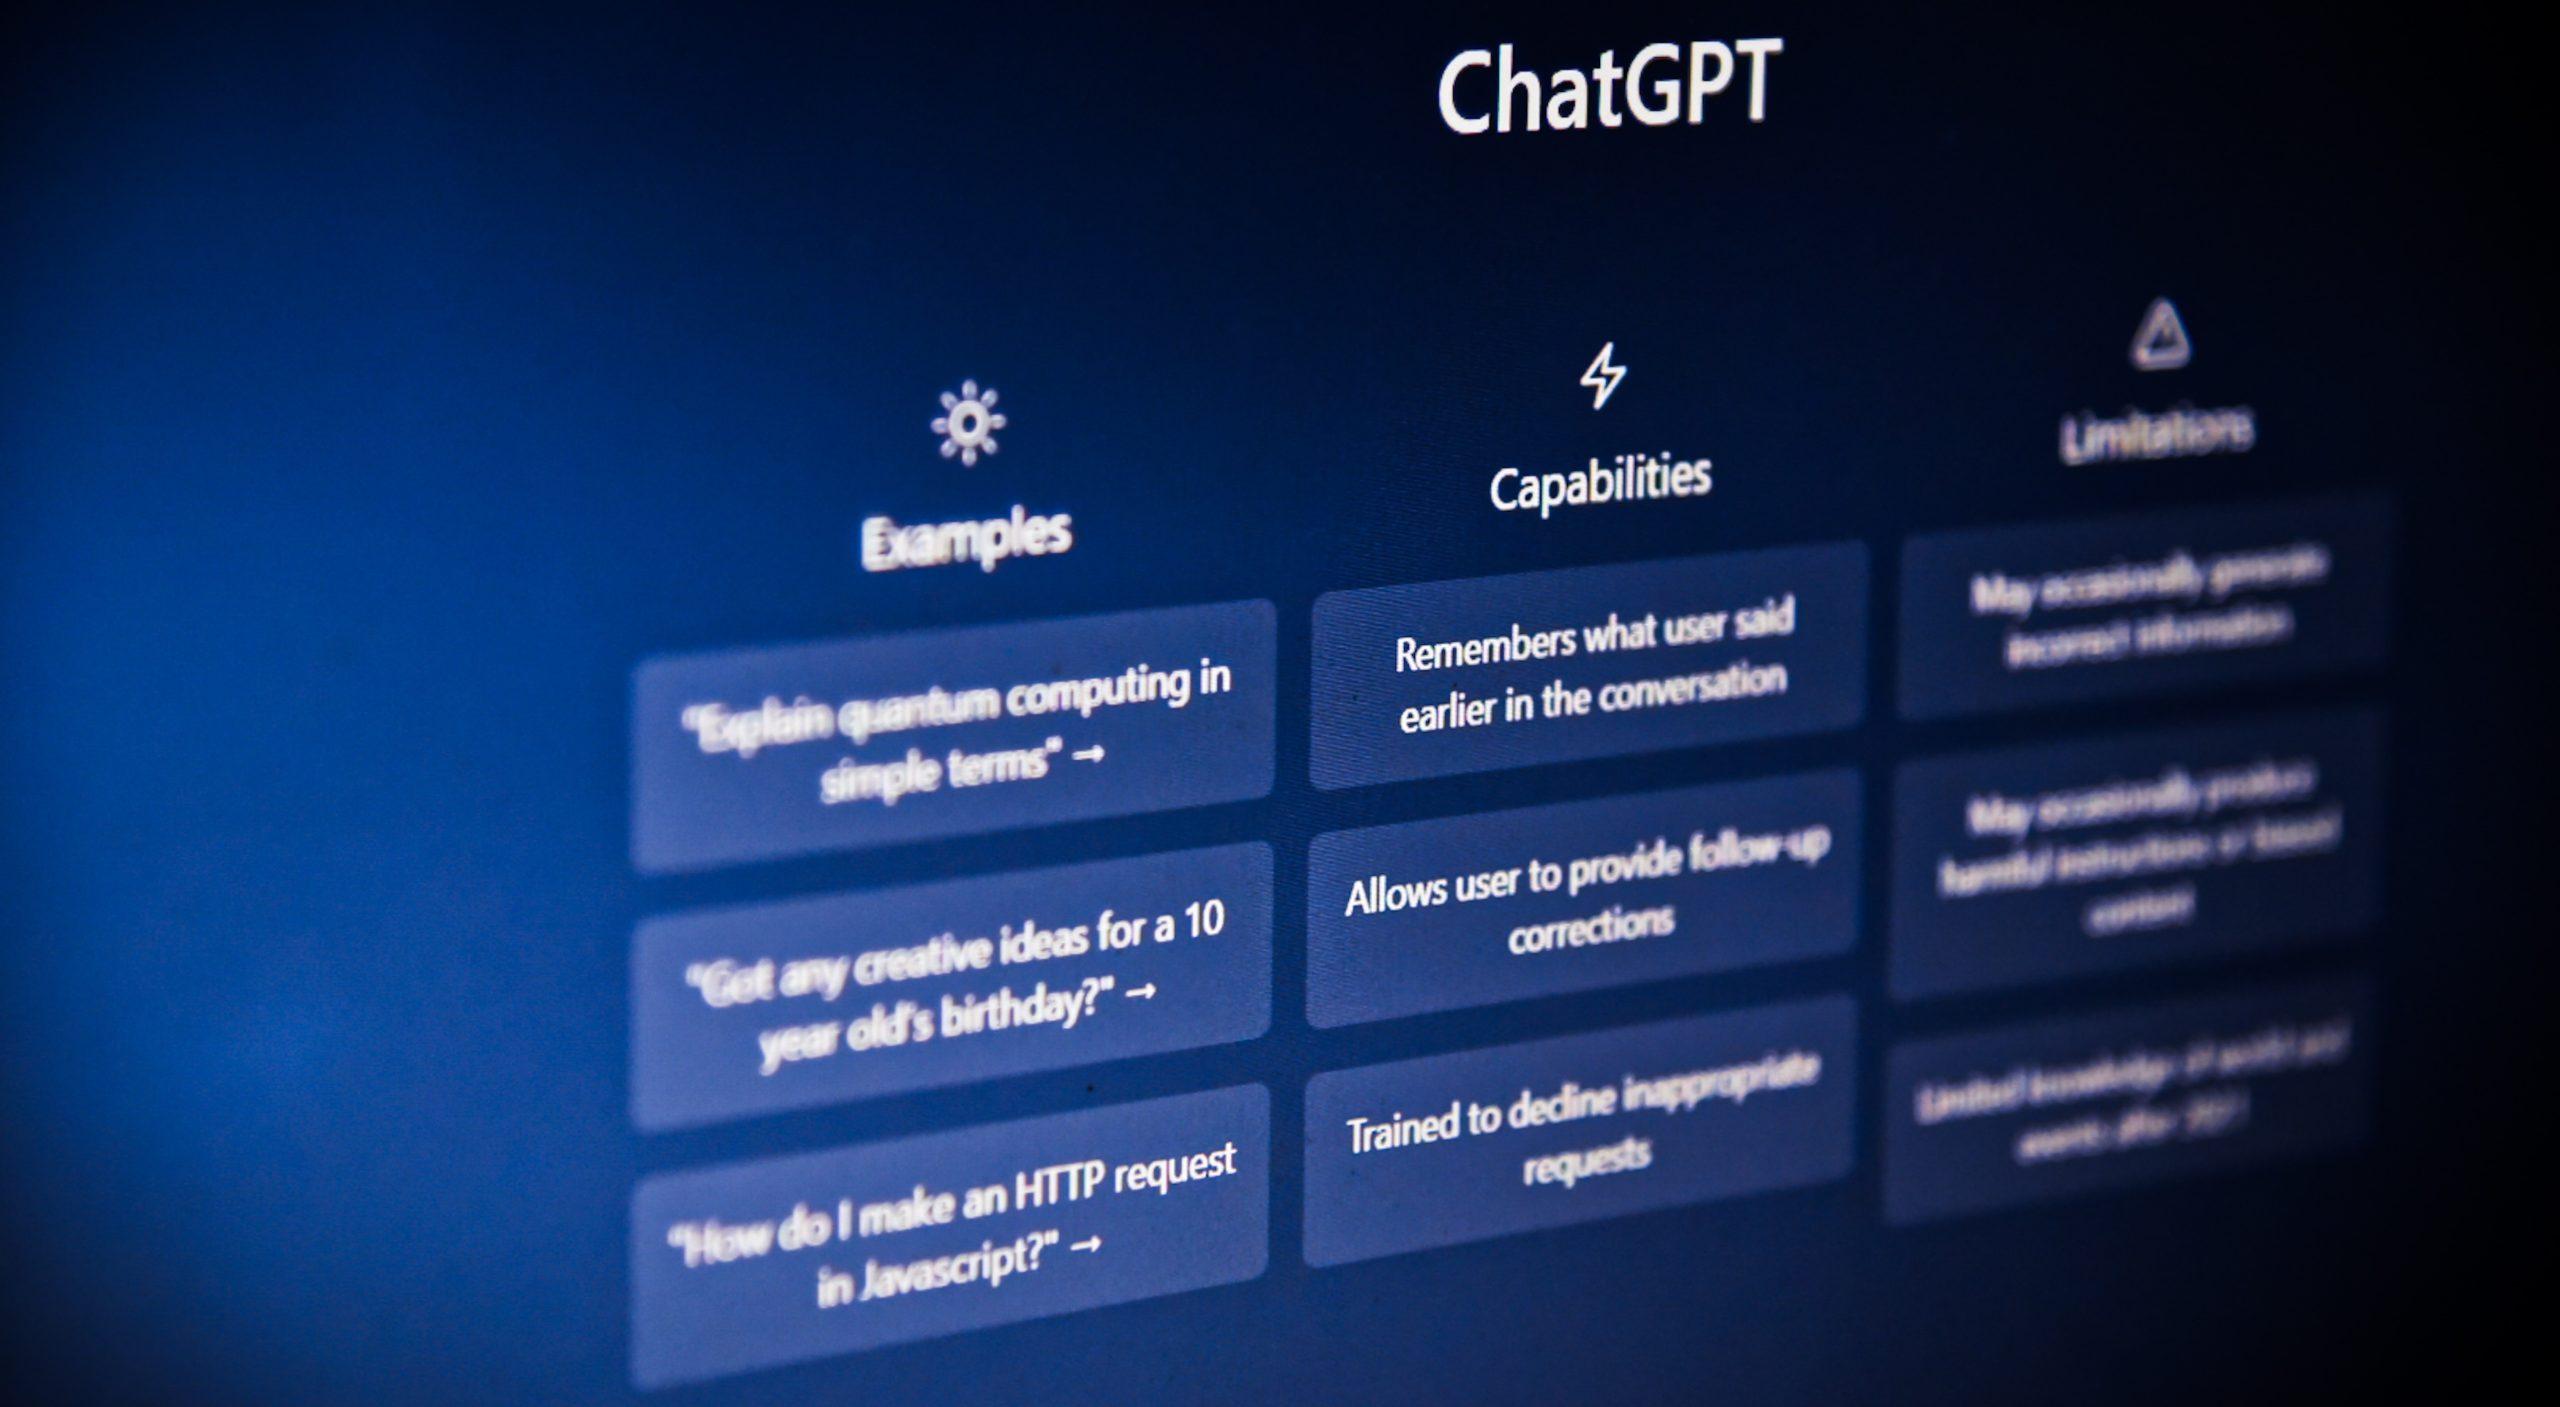 Laptop showing a page from ChatGPT.